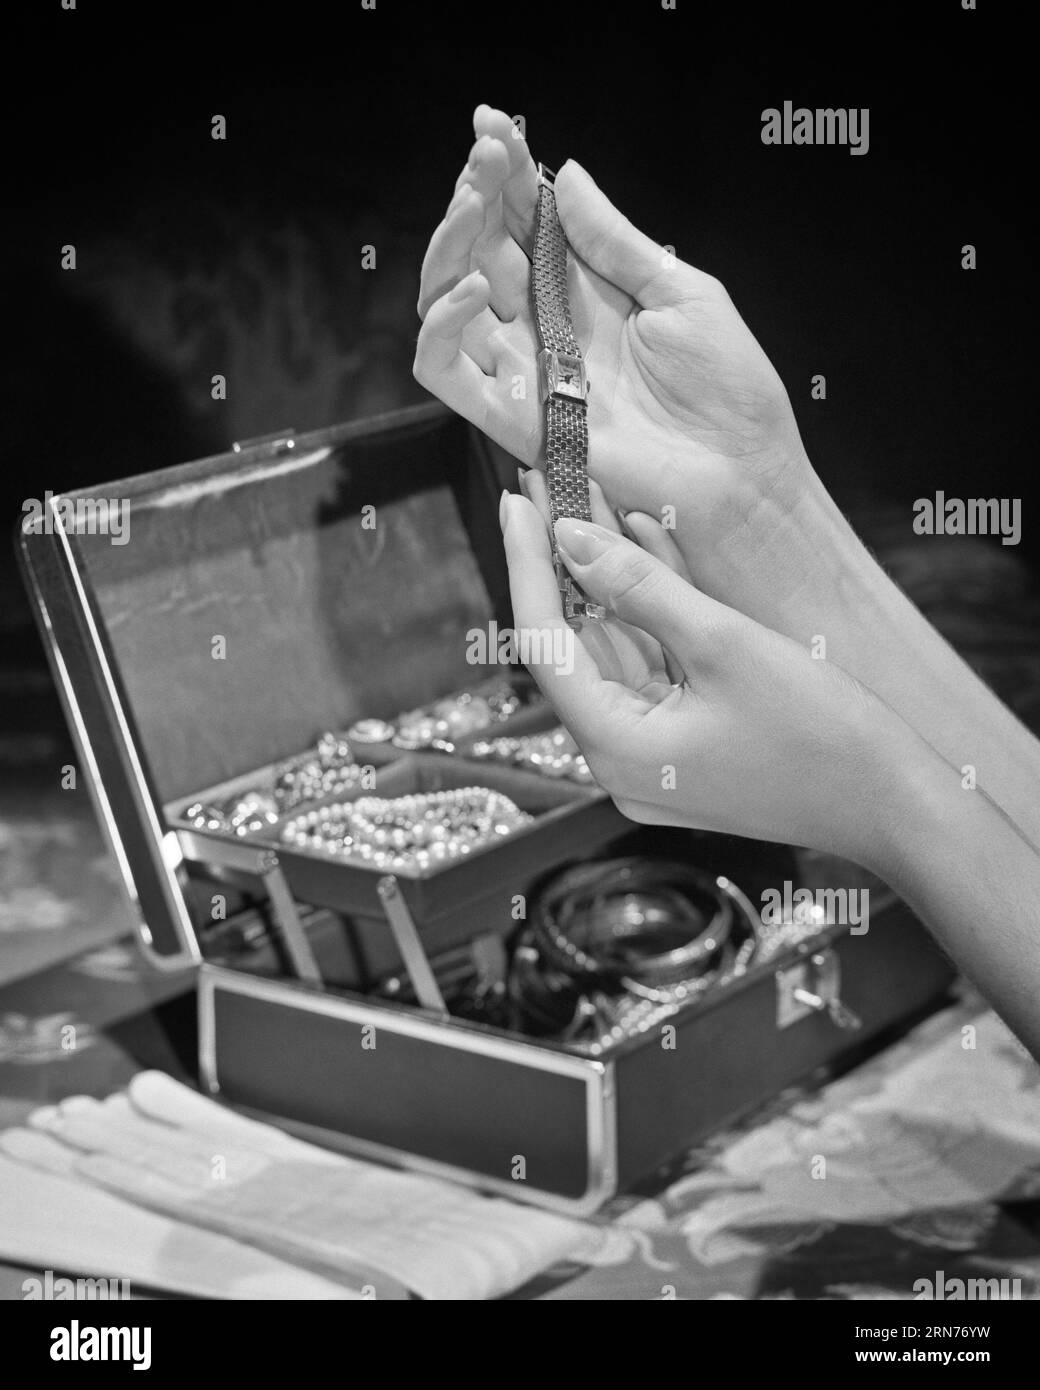 1940s MANICURED FEMALE HANDS HOLDING A WRISTWATCH ABOVE AN OPEN JEWELRY CASE  - s2195 HAR001 HARS MID-ADULT MID-ADULT WOMAN BLACK AND WHITE CAUCASIAN ETHNICITY HANDS ONLY HAR001 OLD FASHIONED REPRESENTATION TIMEPIECE Stock Photo